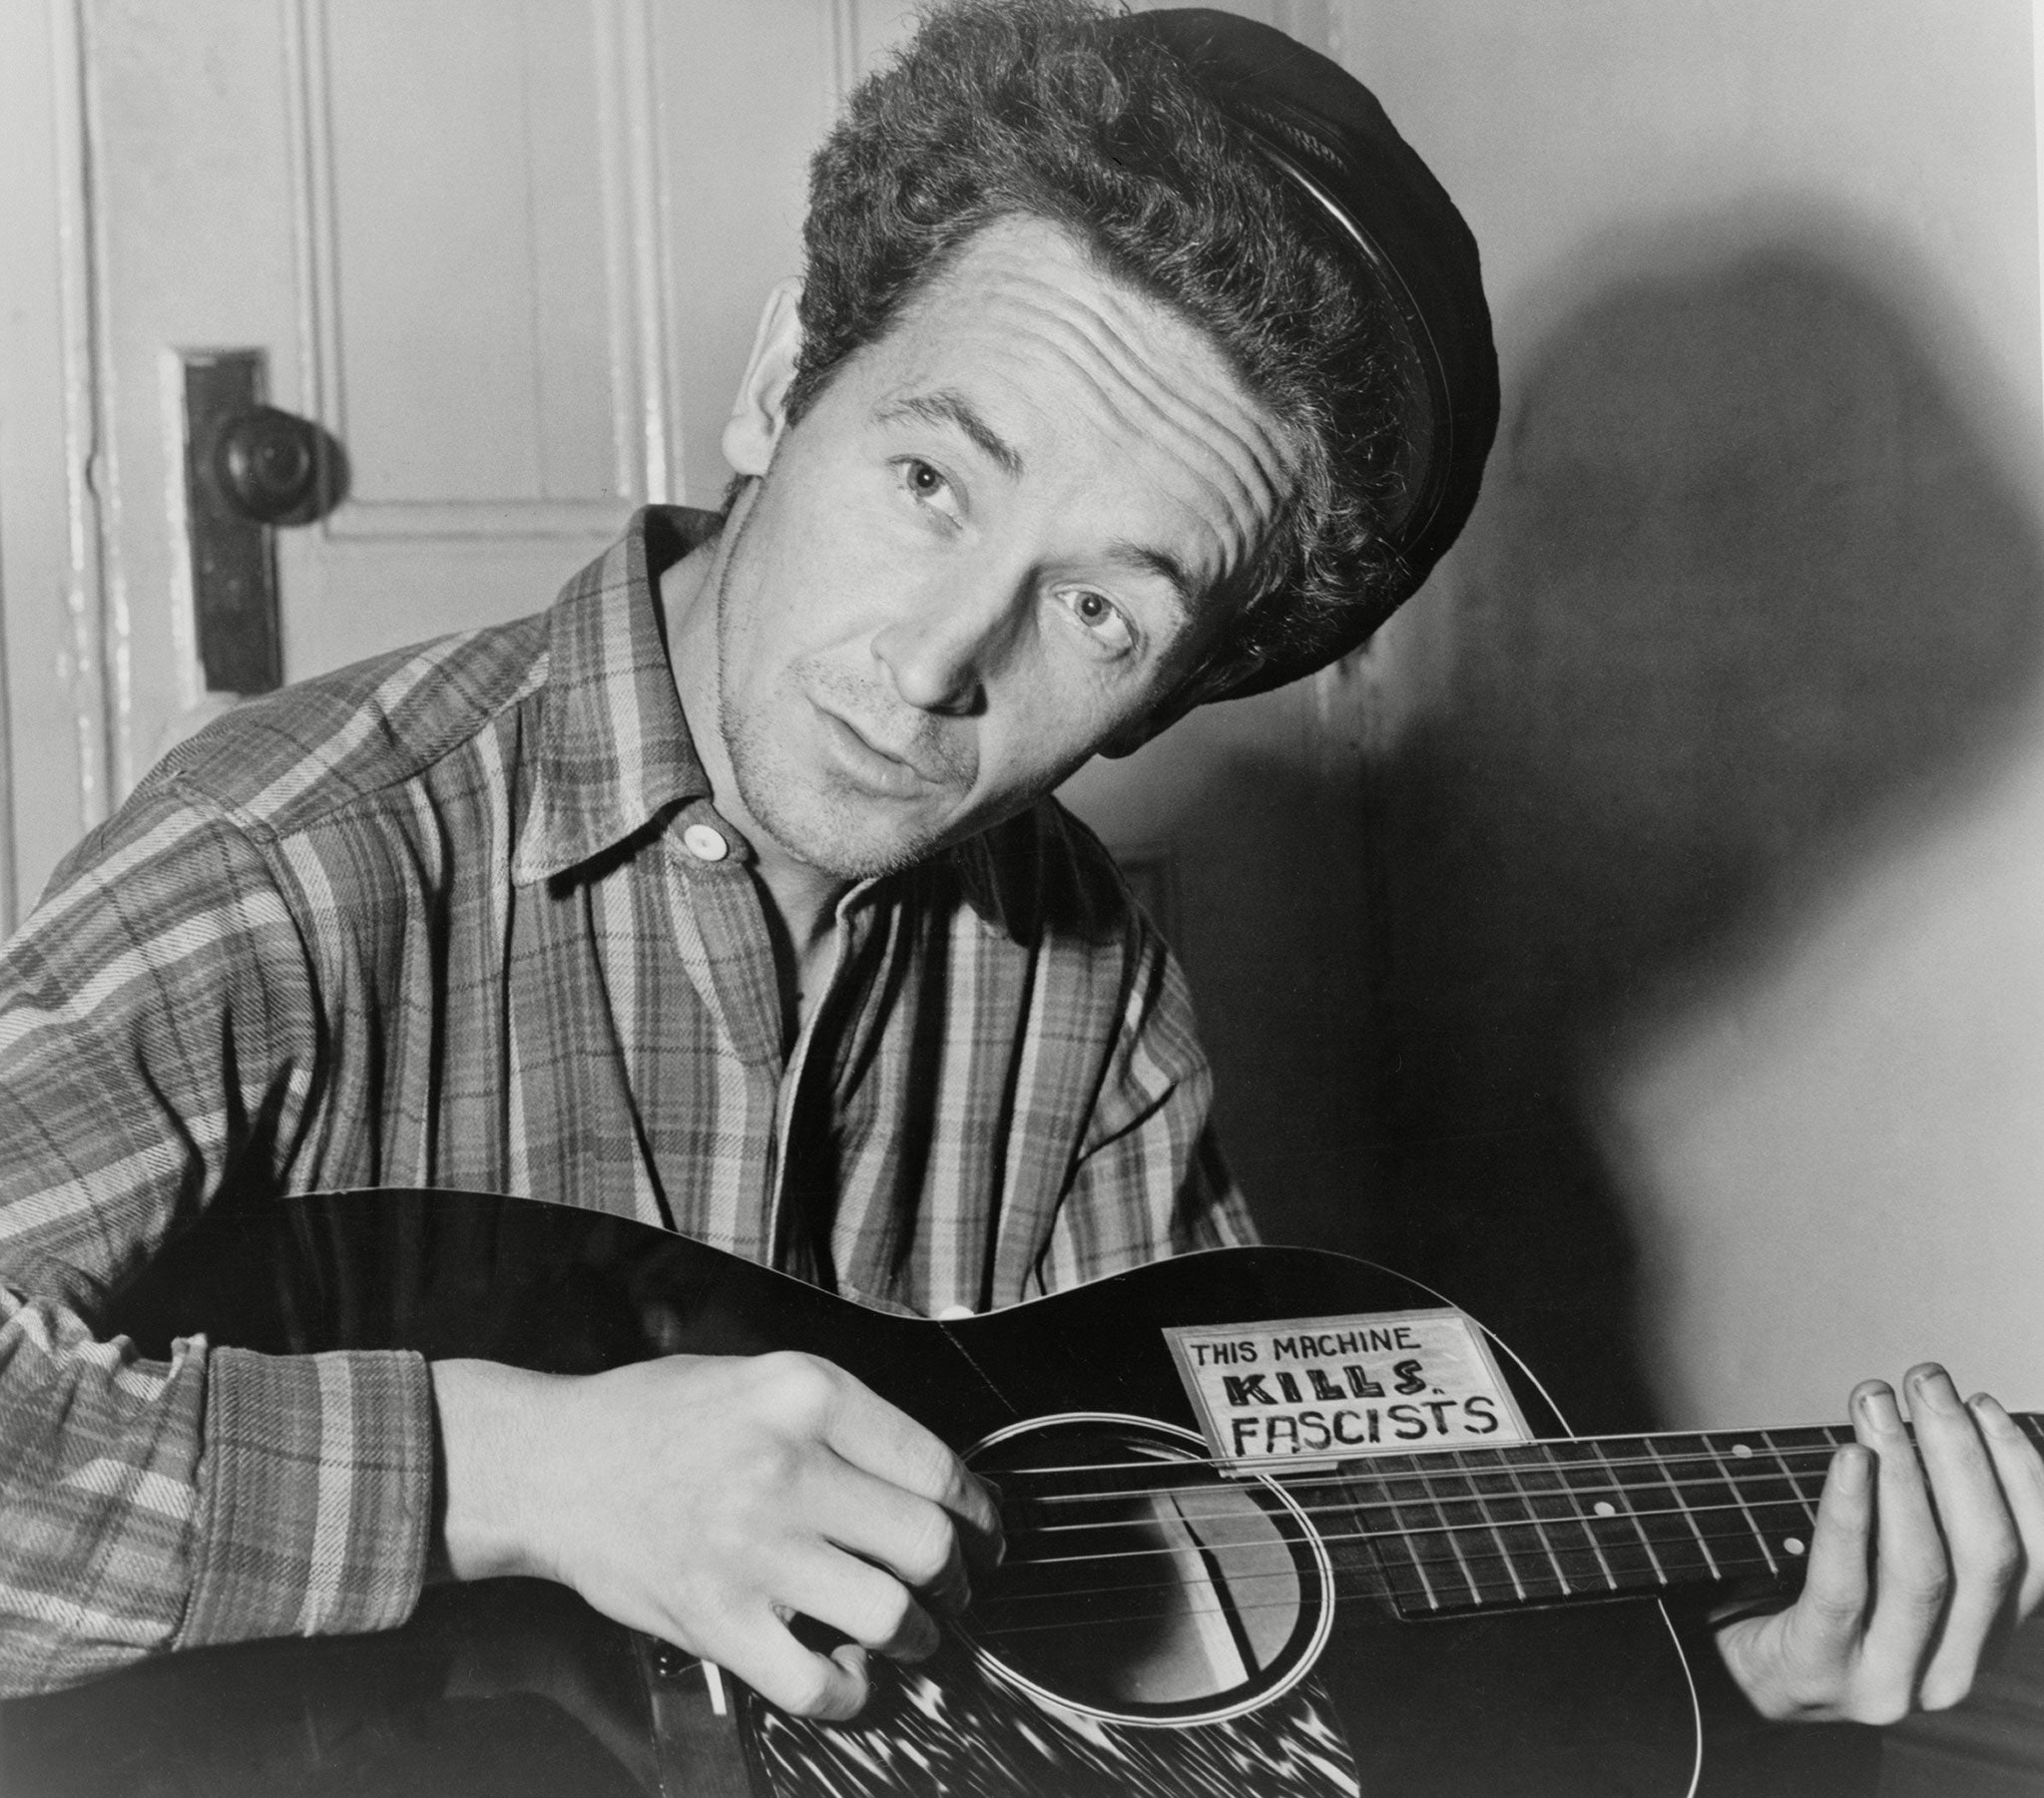 Woody Guthrie with his guitar. The sticker reads 'This machine kills fascists'